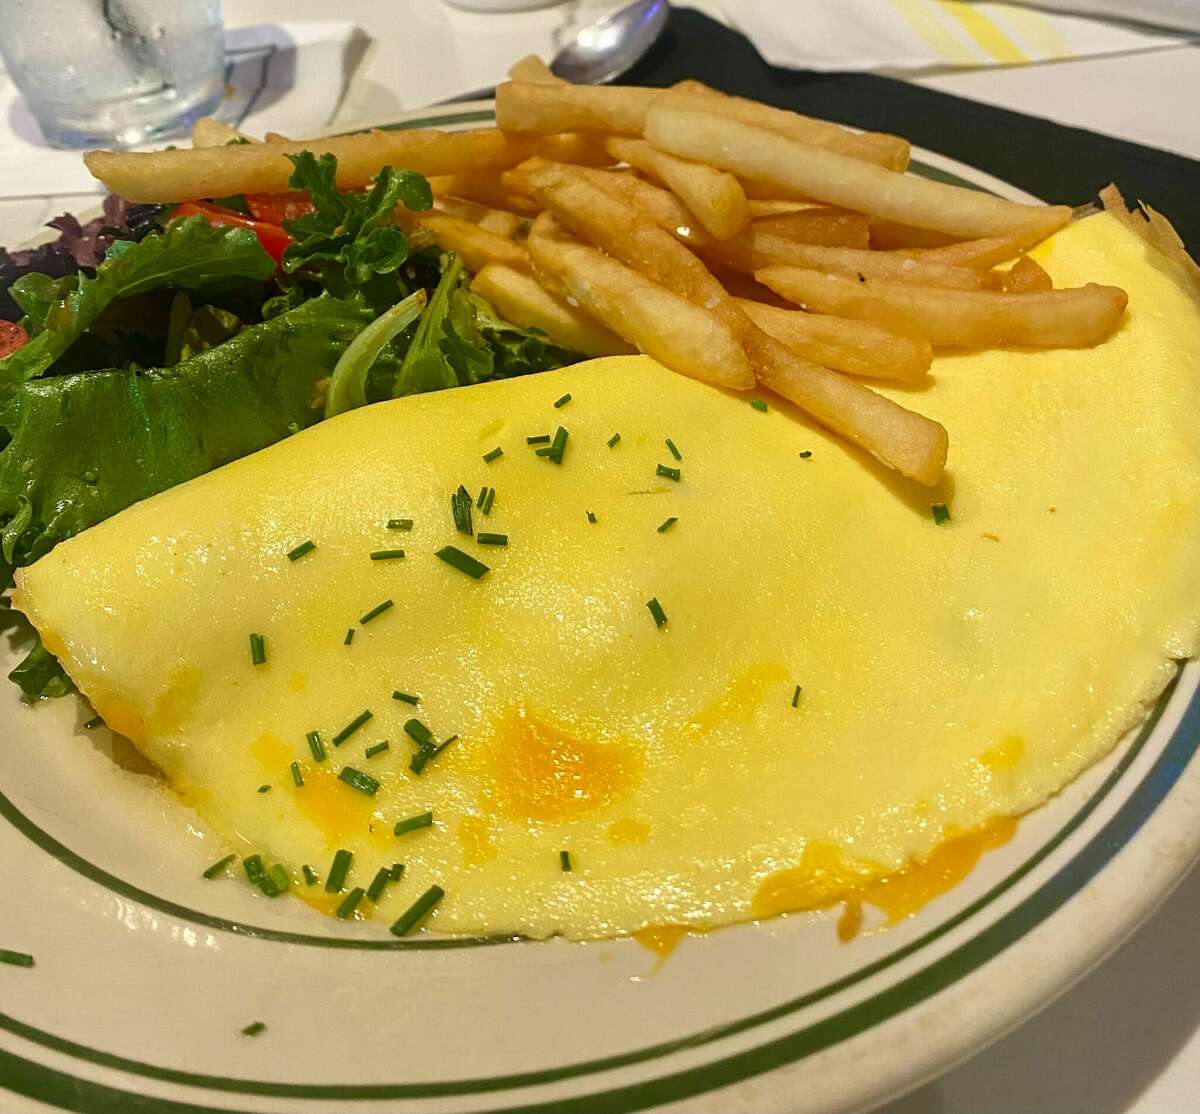 The B.B. Lemon omelet is made to order just the way you like.